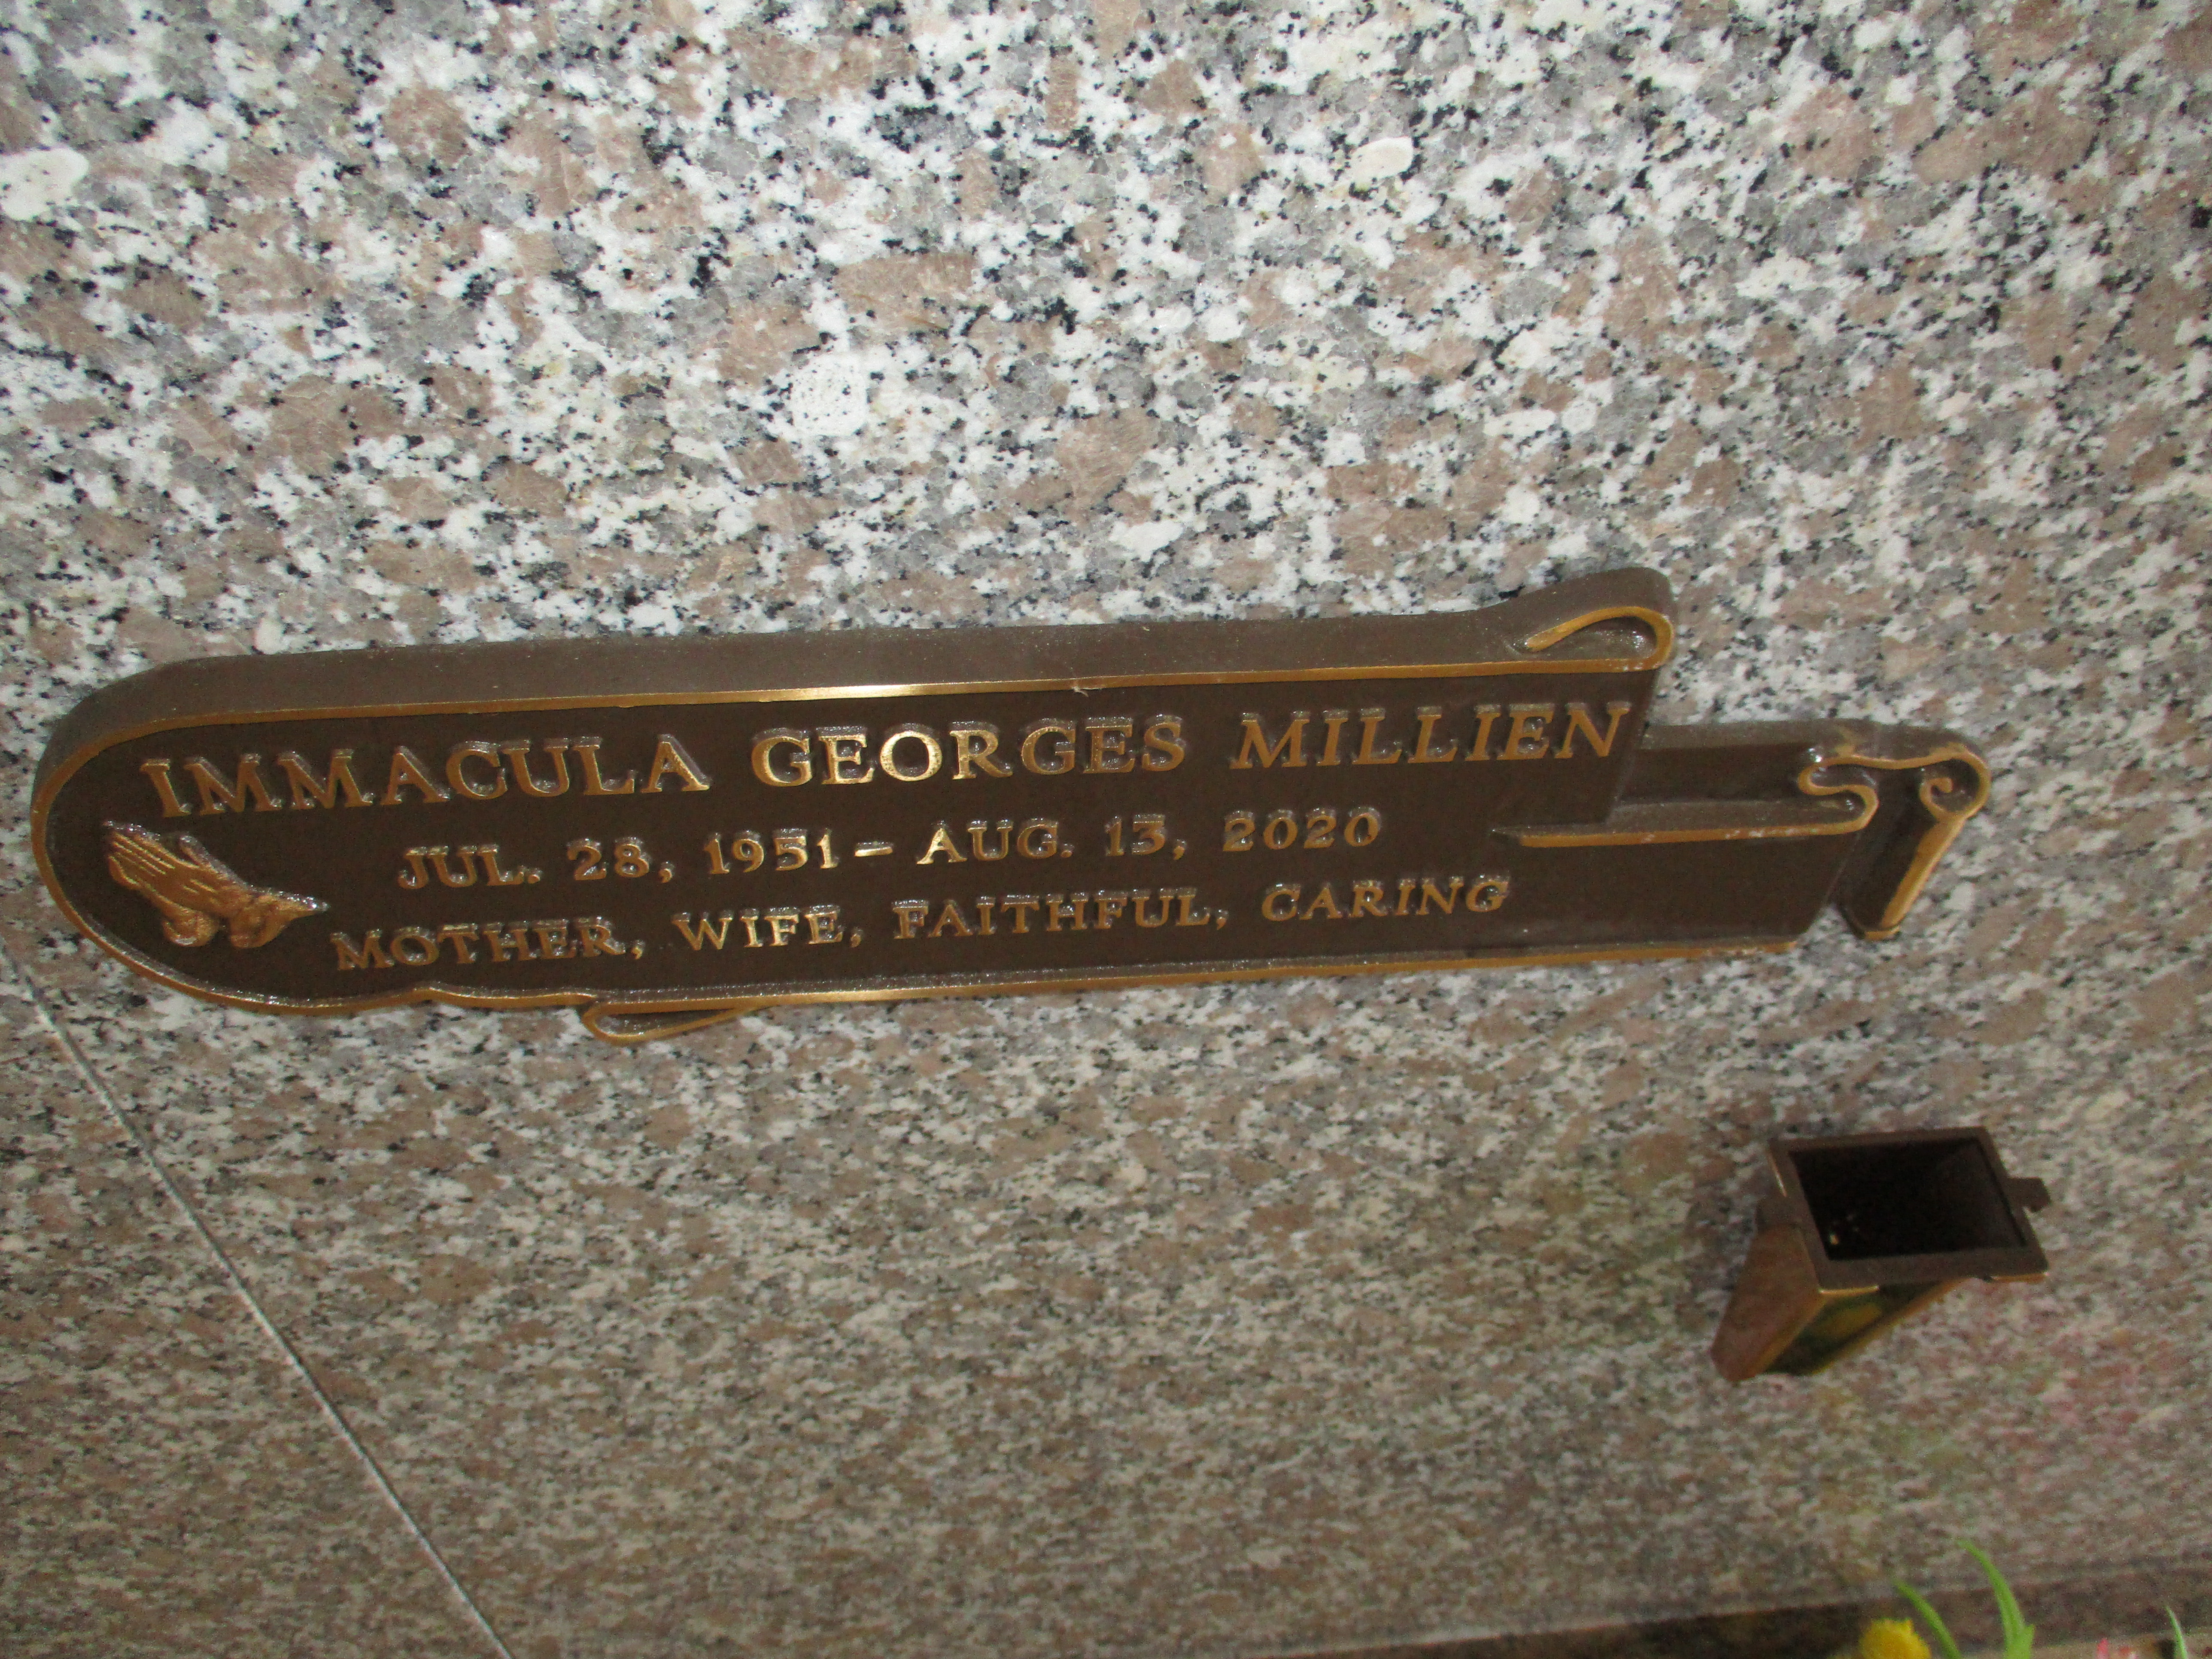 Immacula Georges Millien